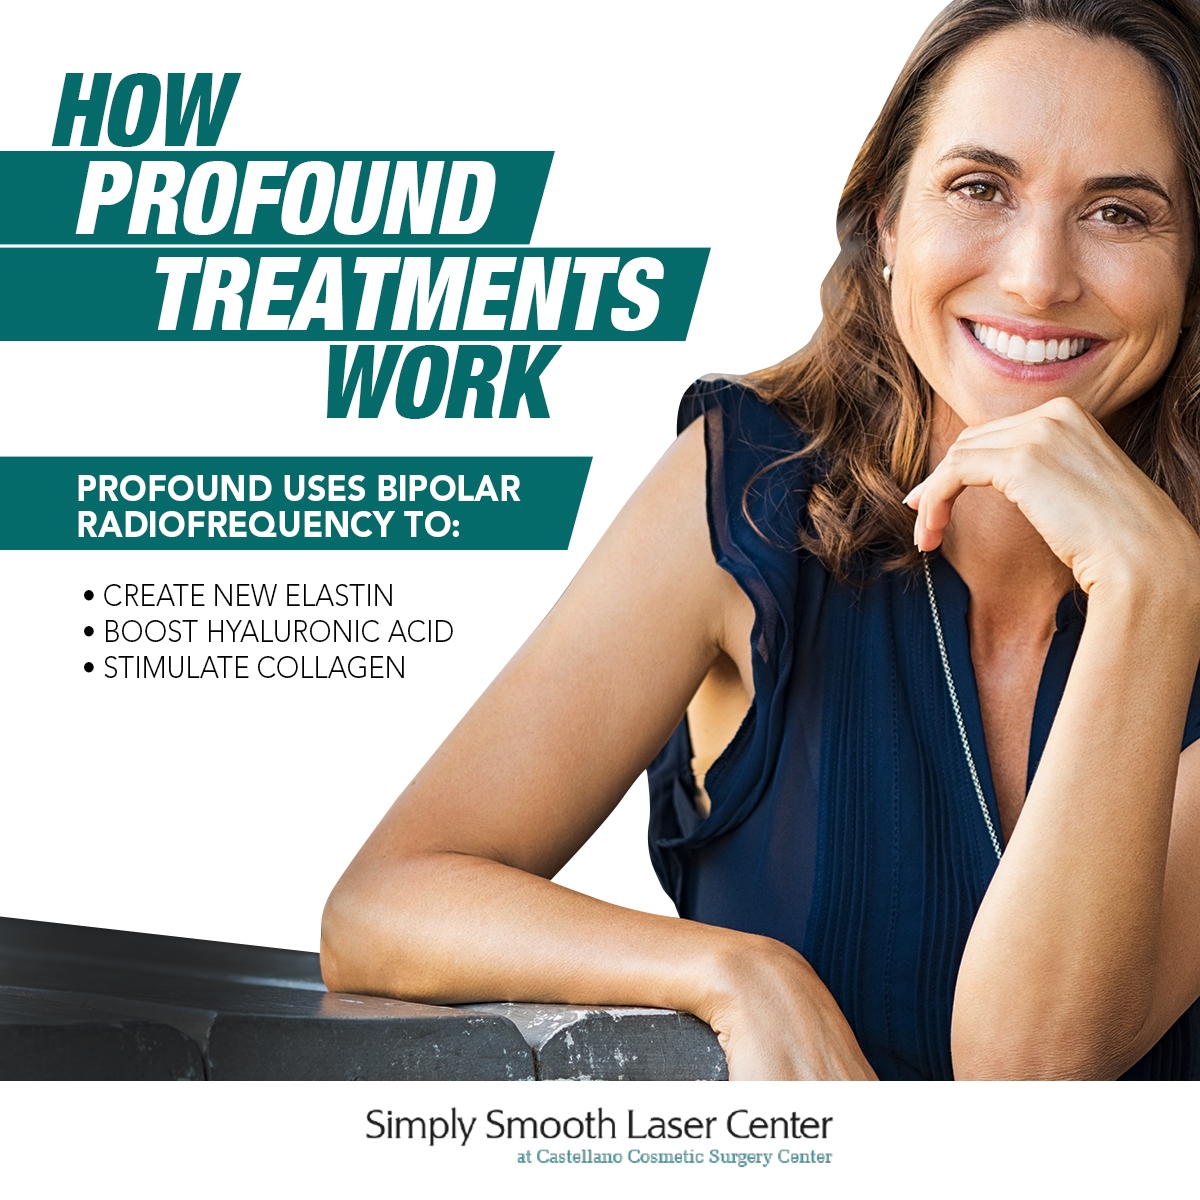 View our June 2020 infographic from Simply Smooth Laser Center in Tampa, Florida.